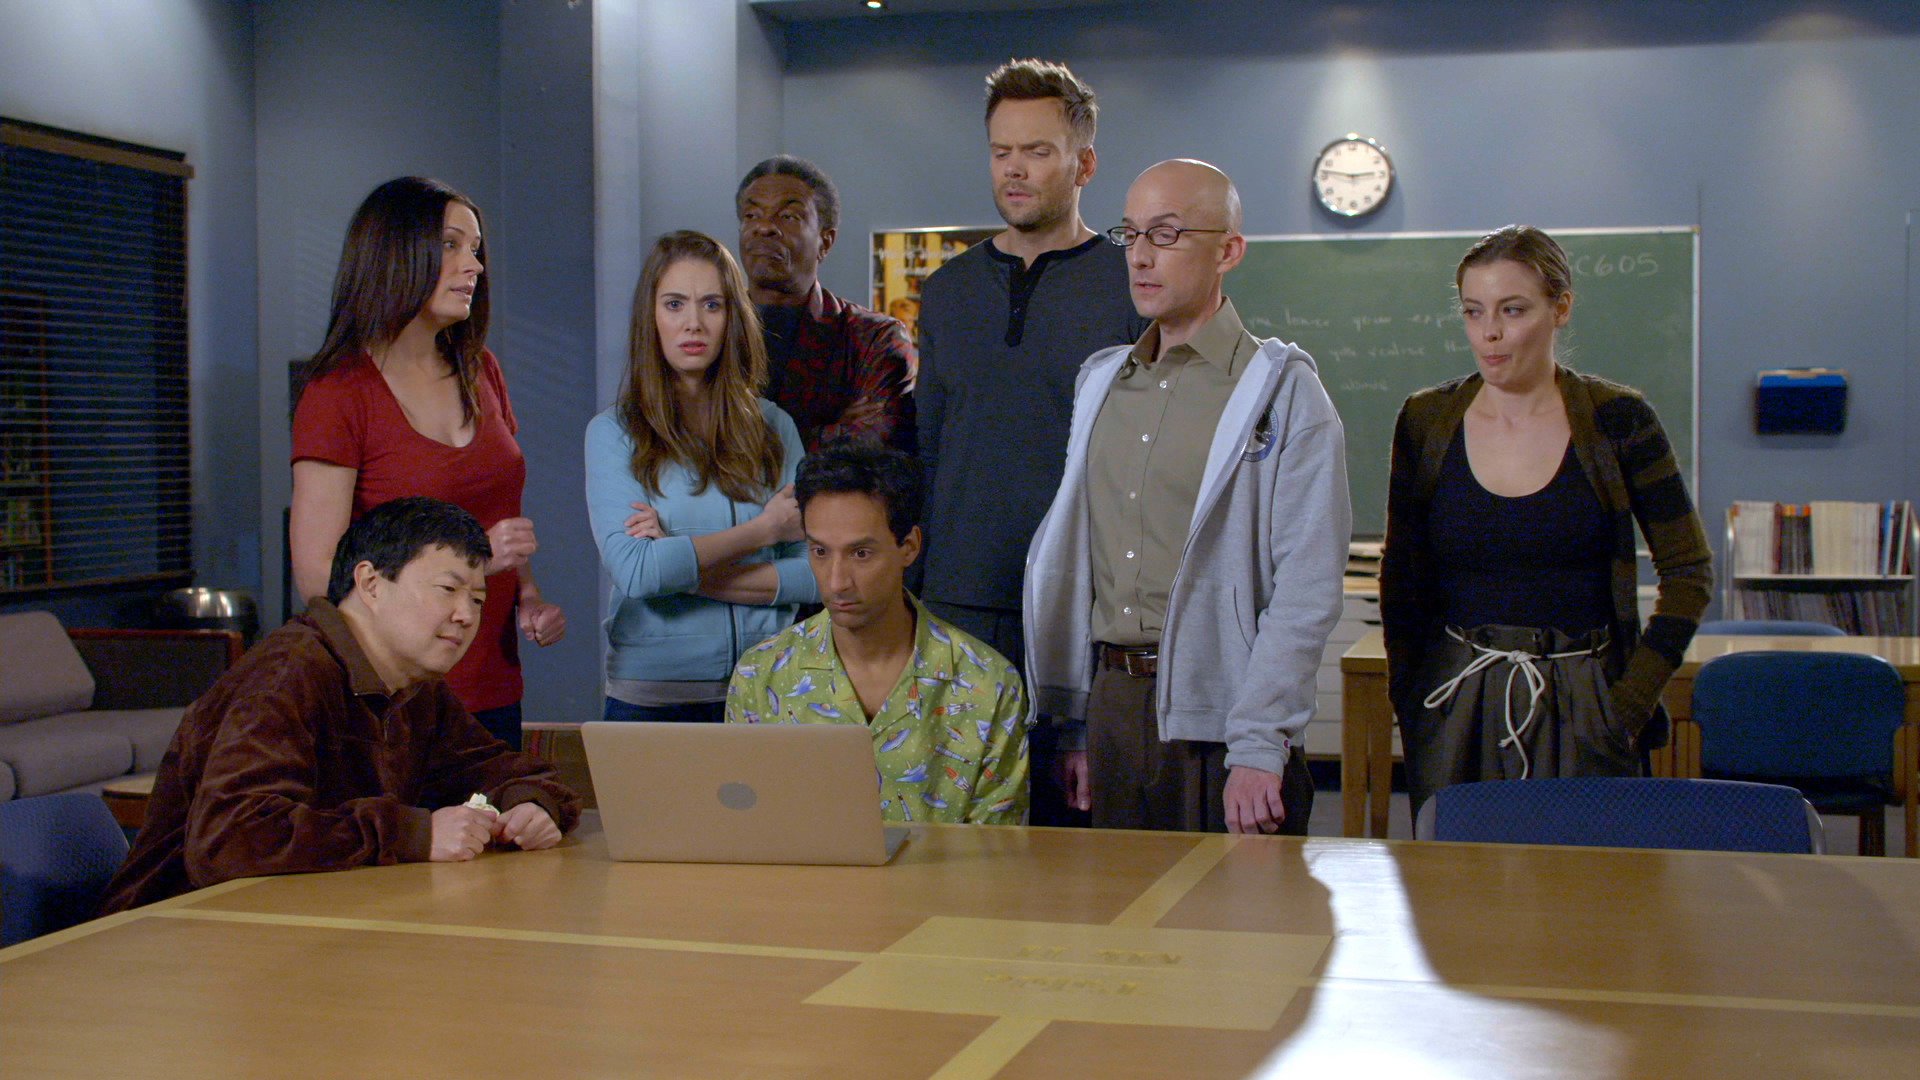 Community Is Over for Now, So Where Did Greendale's Finest End Up?